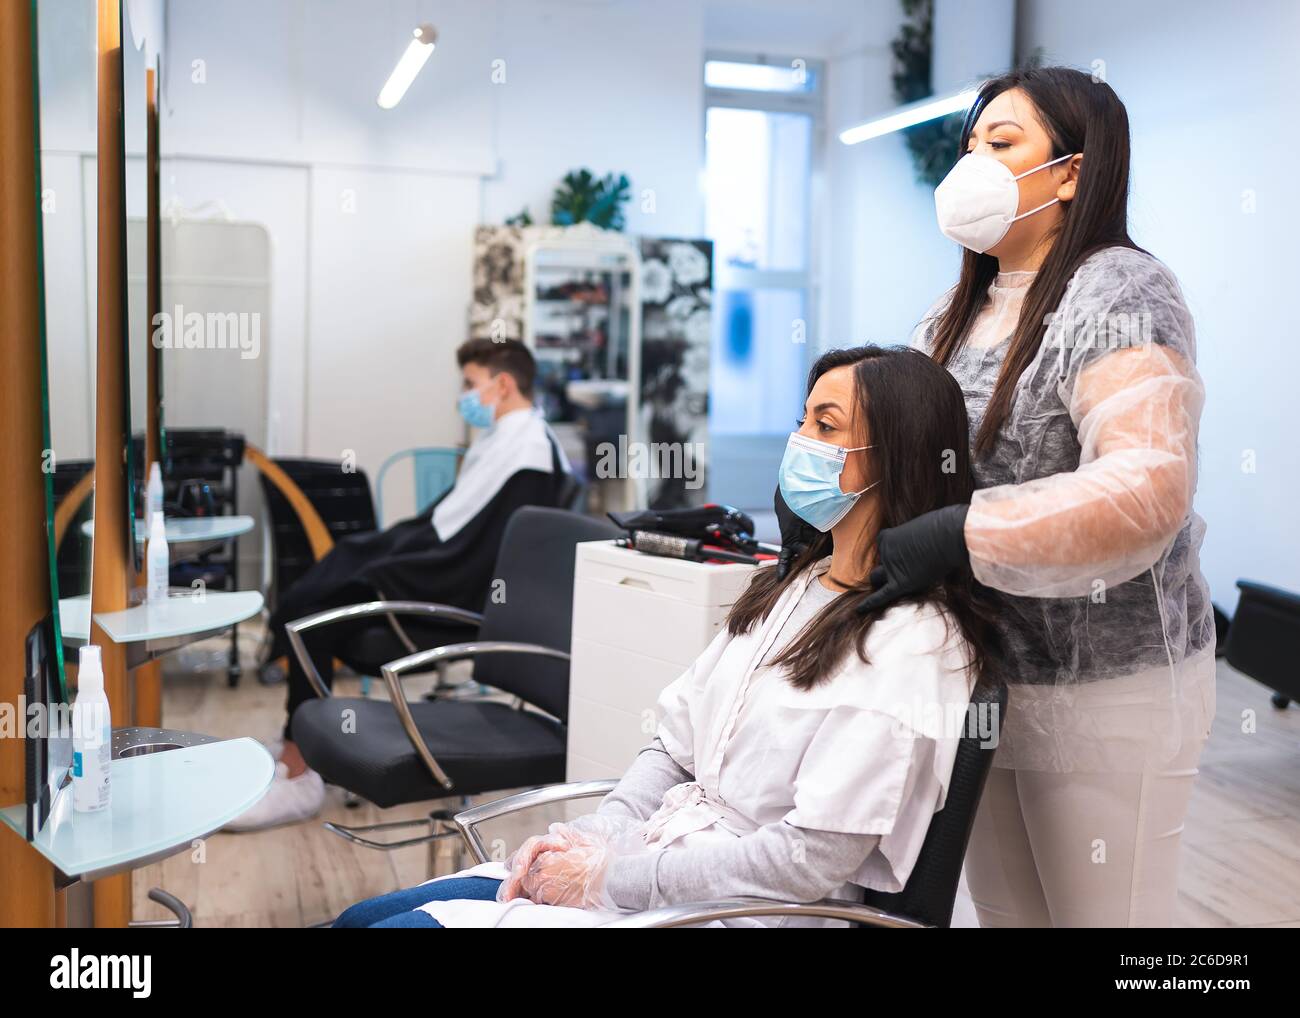 Hairdresser with a protective mask and gloves measuring the hair of a masked client sitting on a chair in front of a mirror in a hairdressing salon Stock Photo